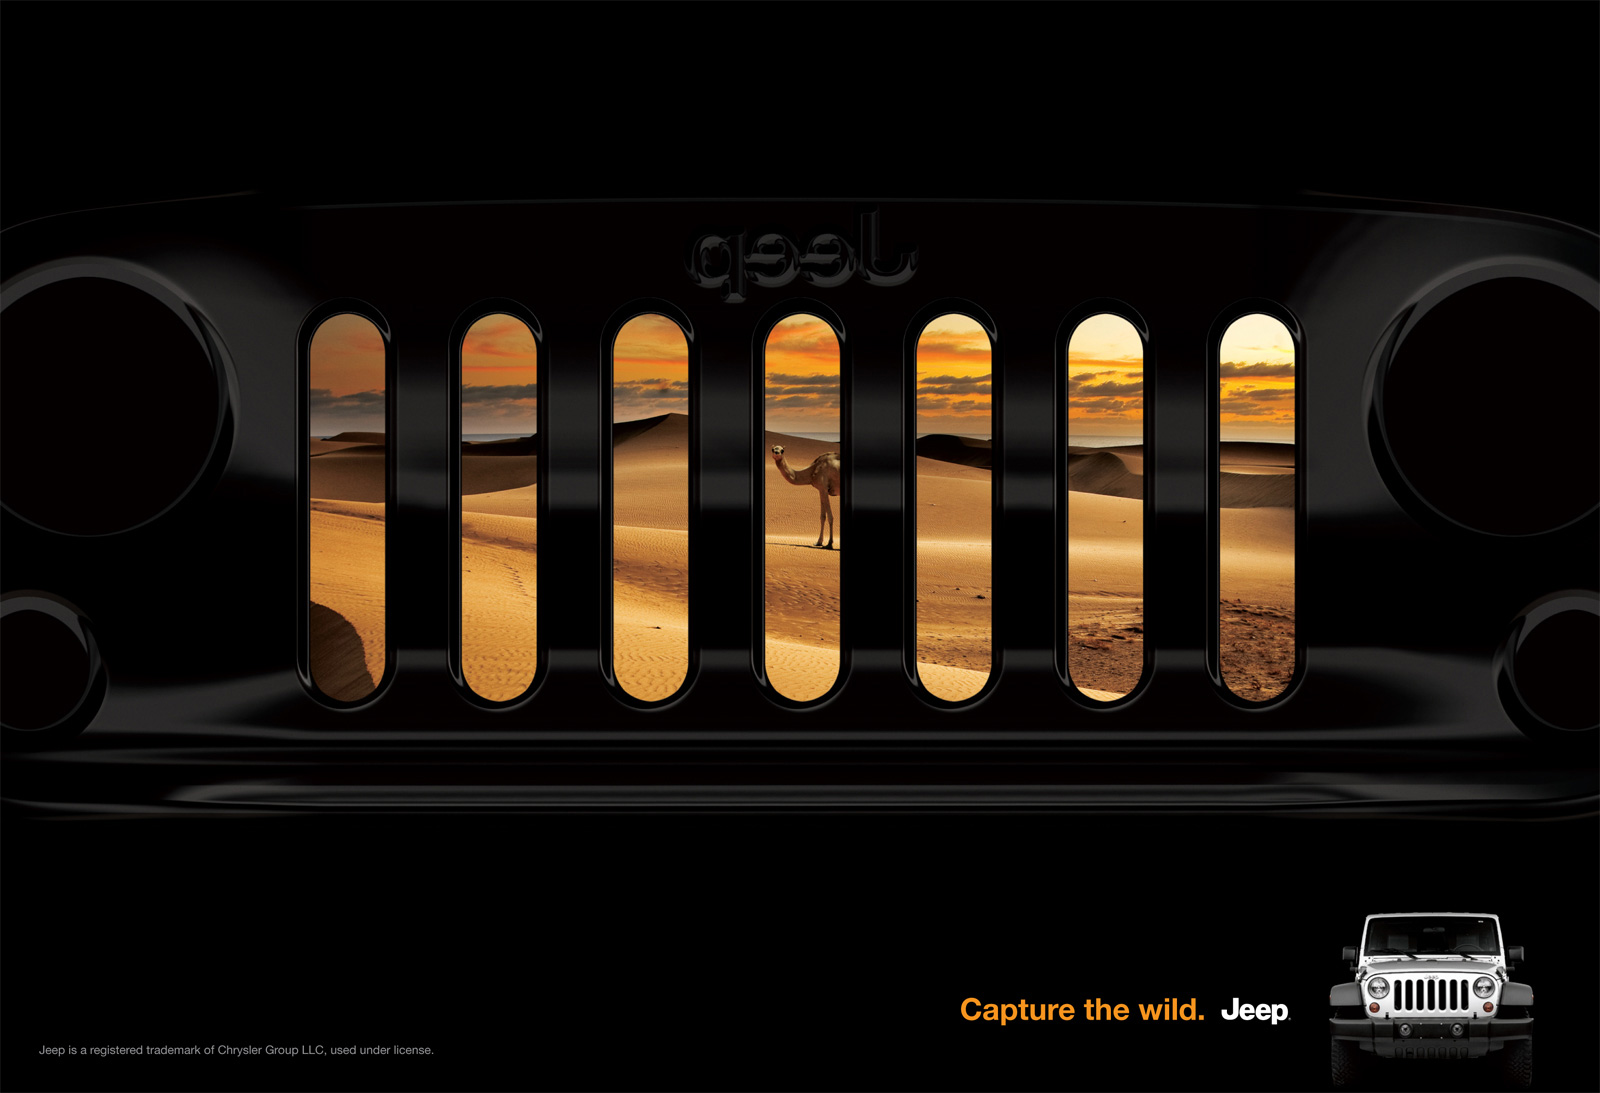 Jeep: Grill, Wrangler, Grill, Compass, Grill, Liberty • Ads of the World™ |  Part of The Clio Network